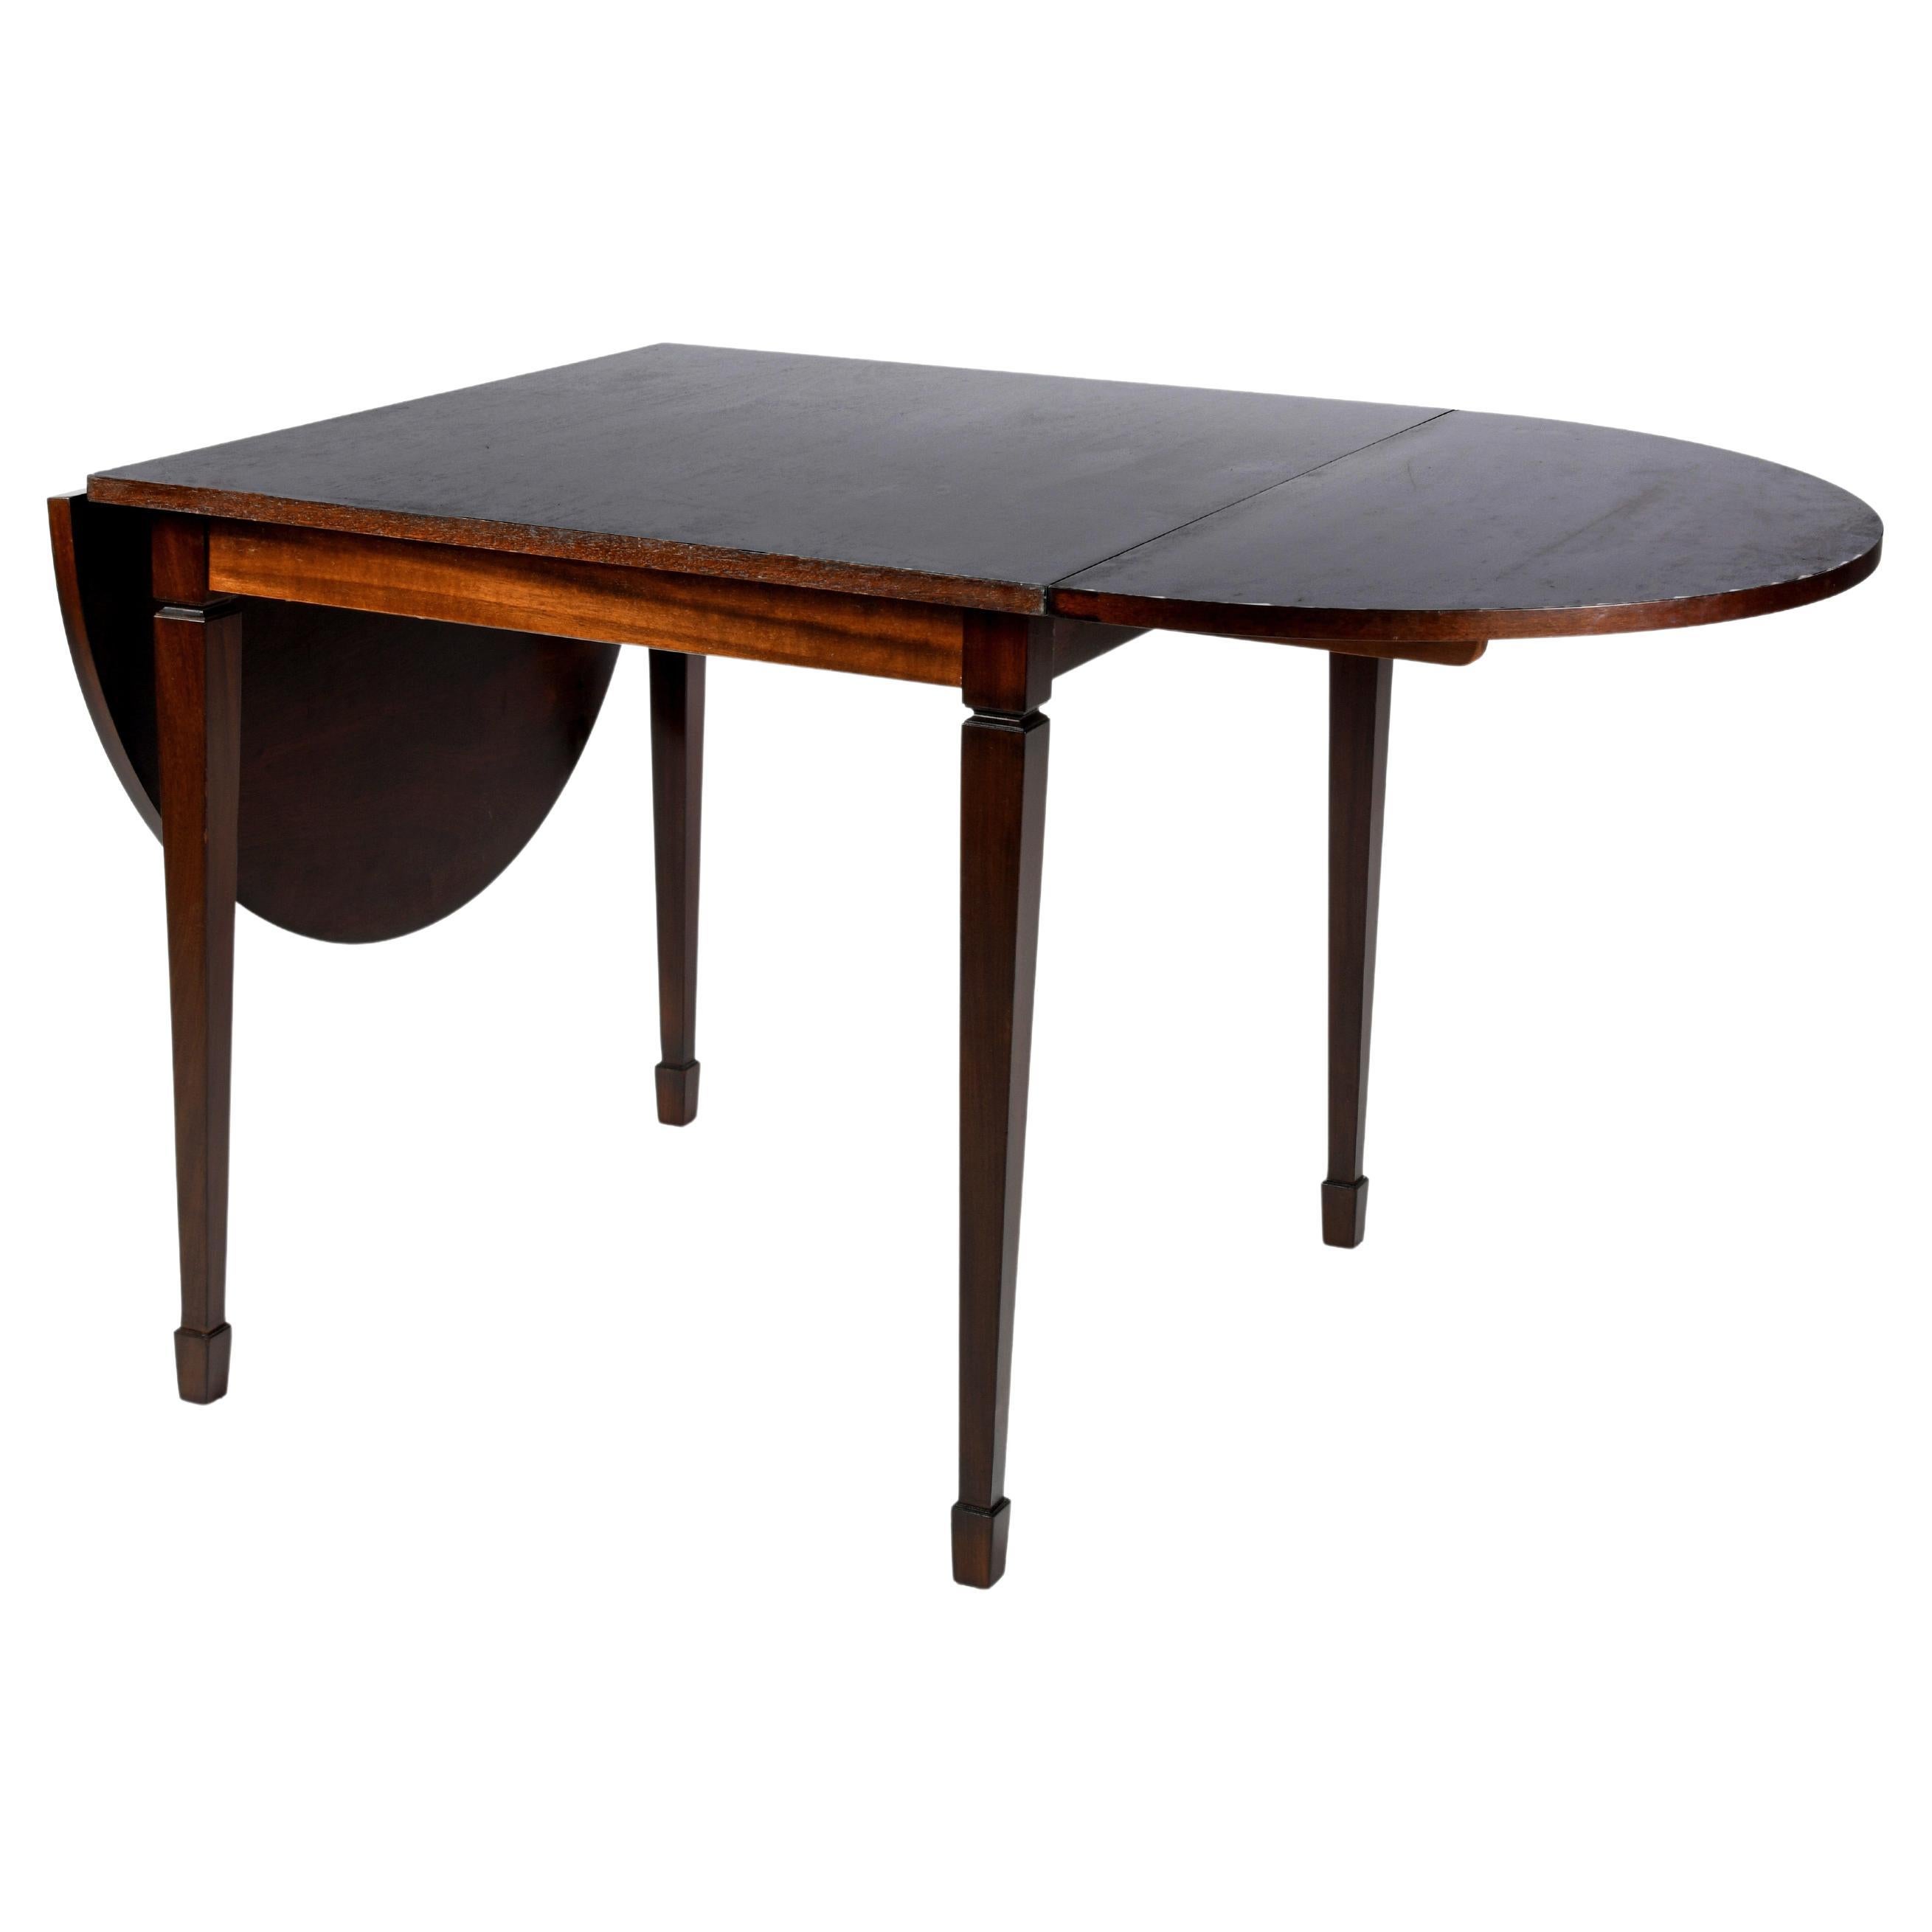 Small square table with two rounded extensions forming an oval table For Sale